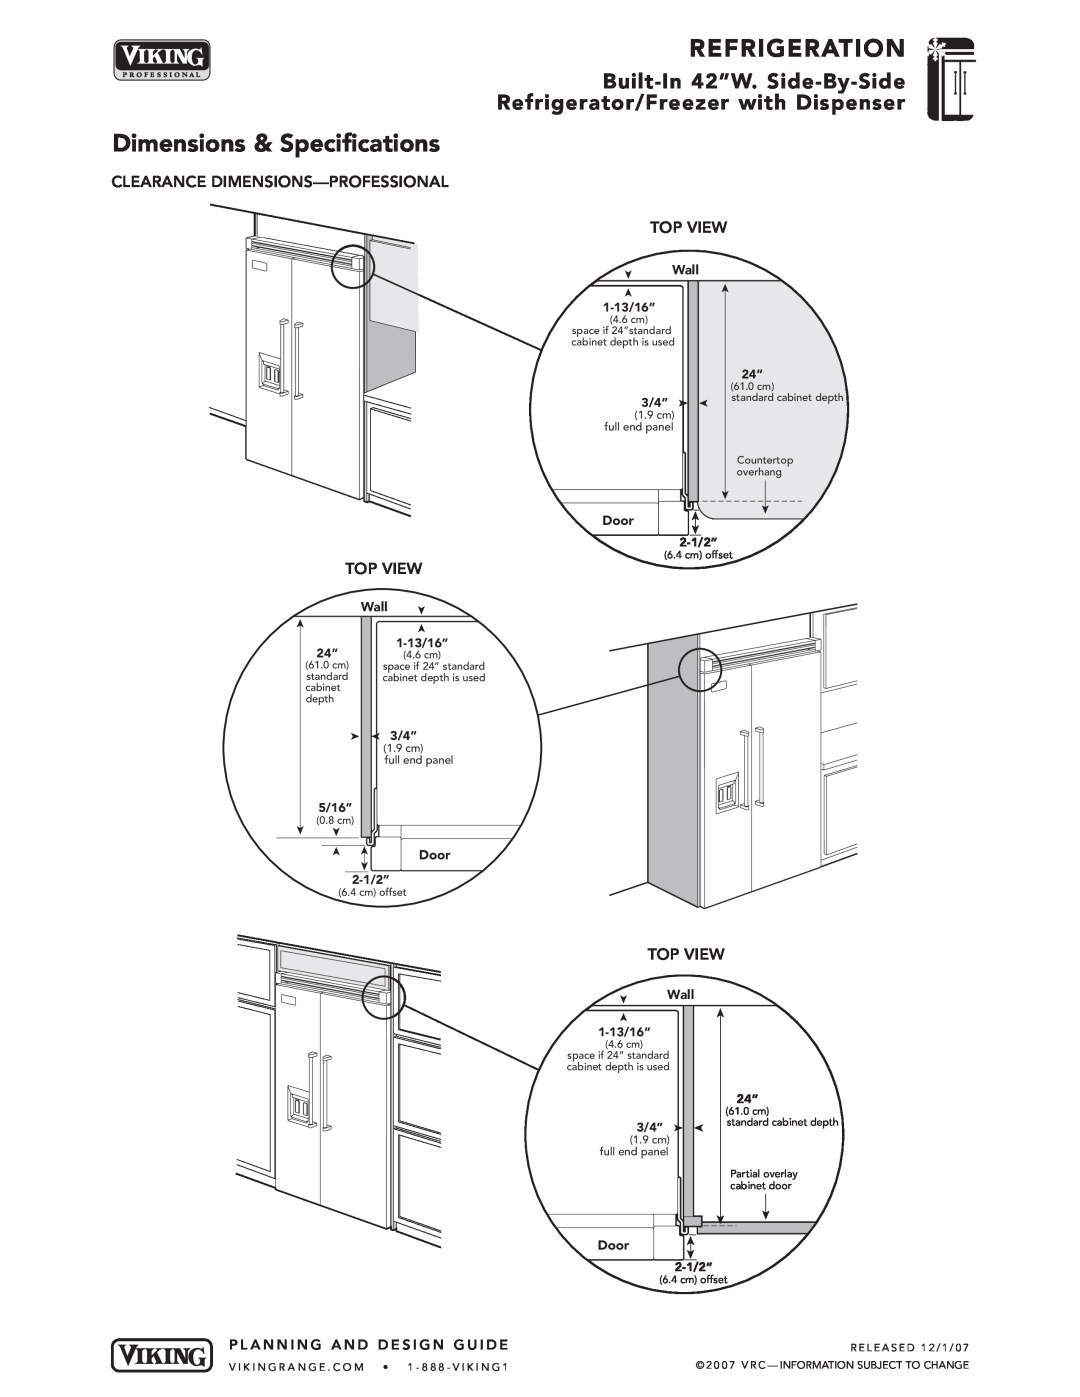 Viking DFSB423D Clearance Dimensions-Professional Top View, Refrigeration, Dimensions & Specifications, Wall, Door, 3/4” 